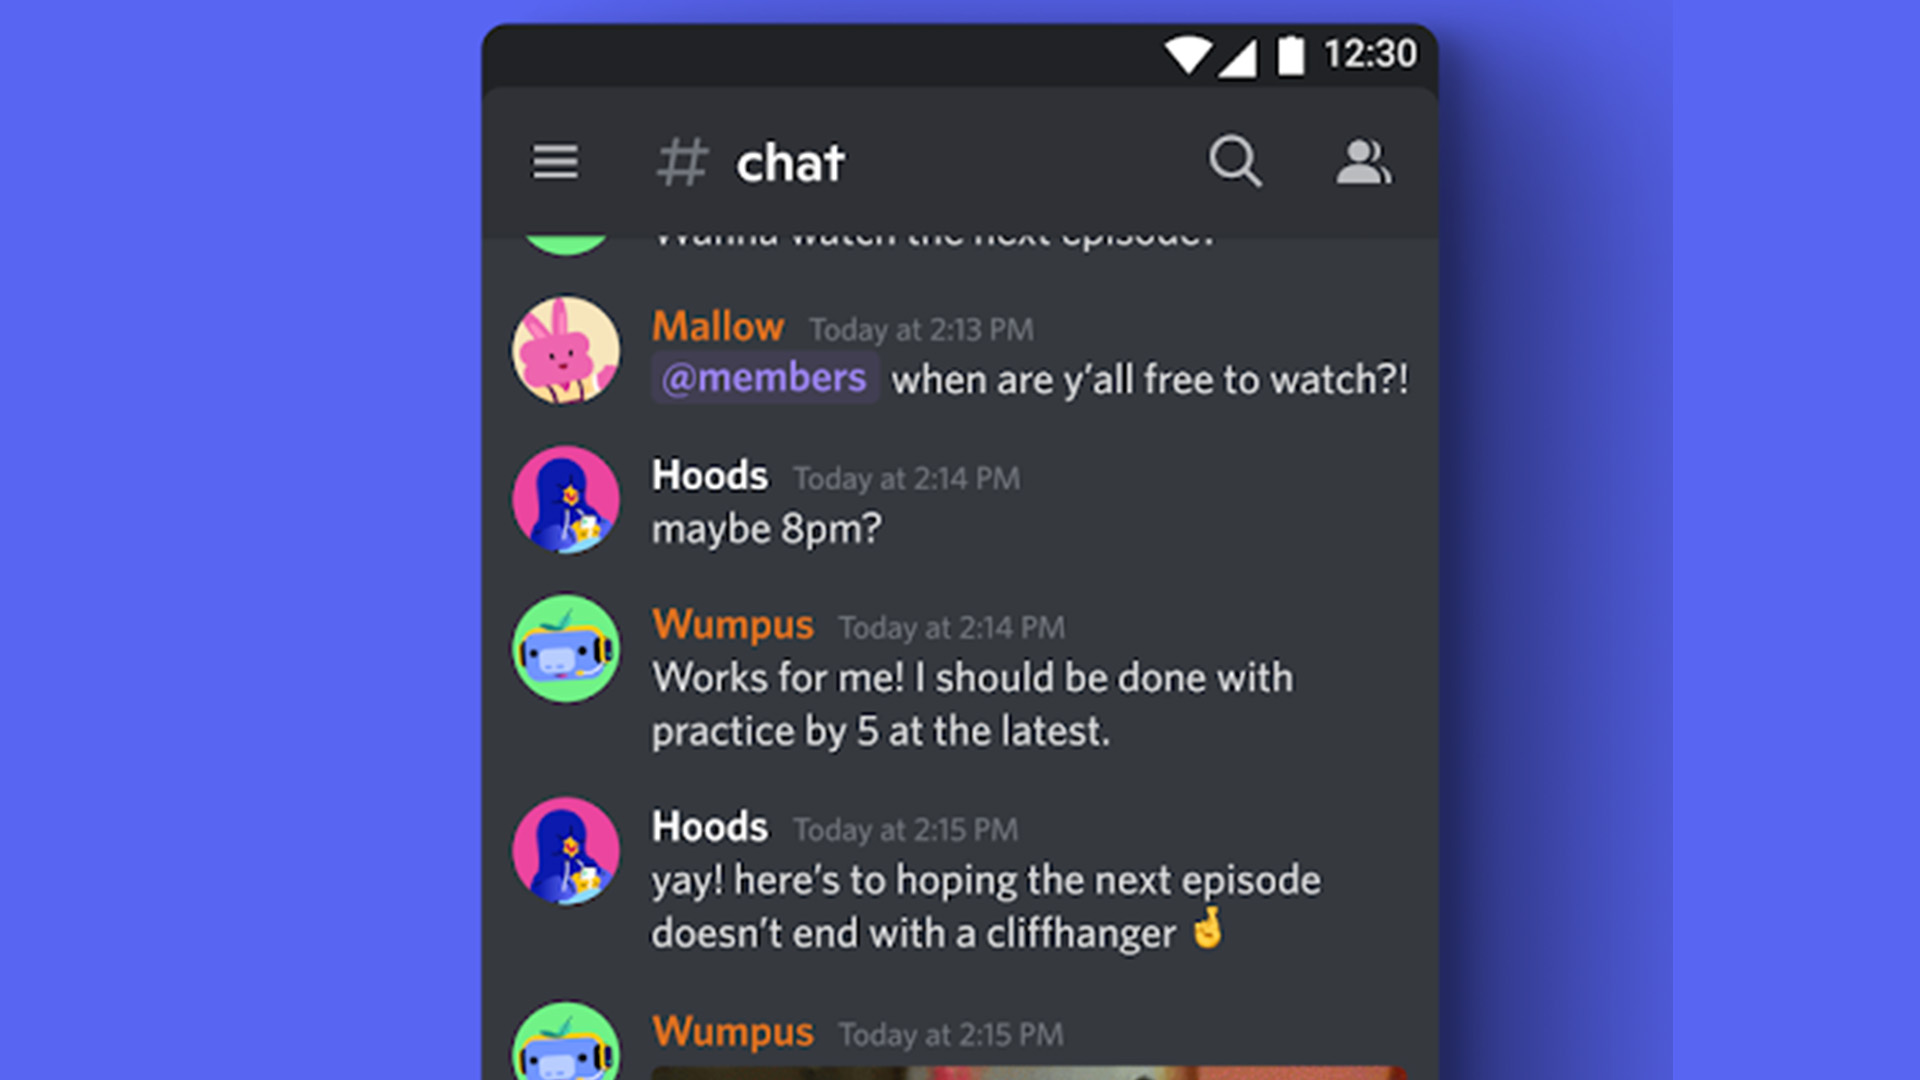 10 best gamer chat apps for Android - Android Authority